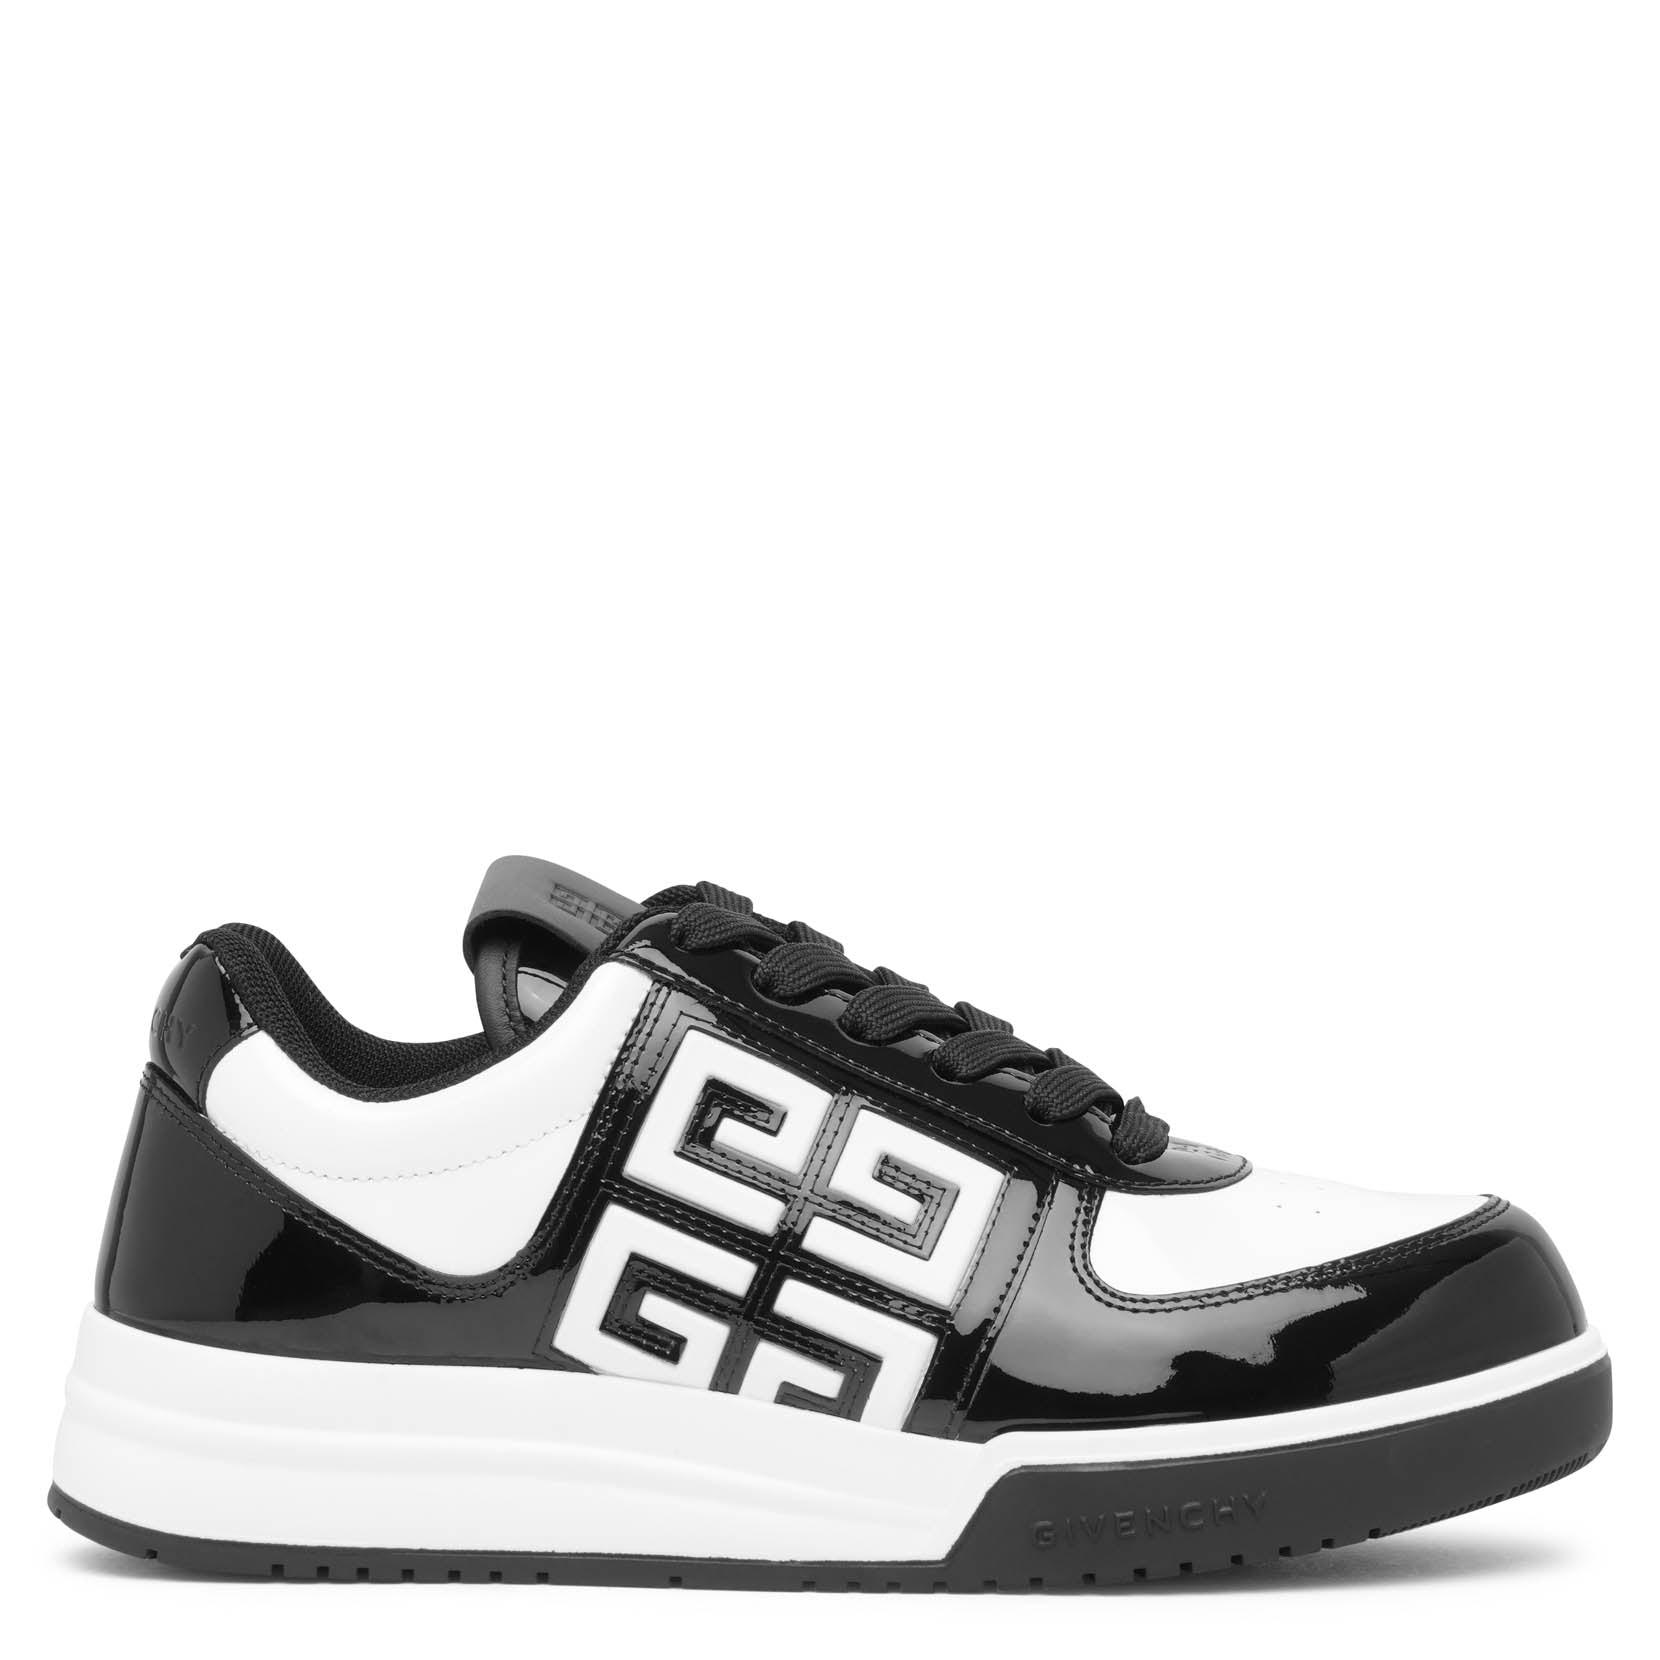 Givenchy G4 Low Top White Leather Sneakers in Black | Lyst